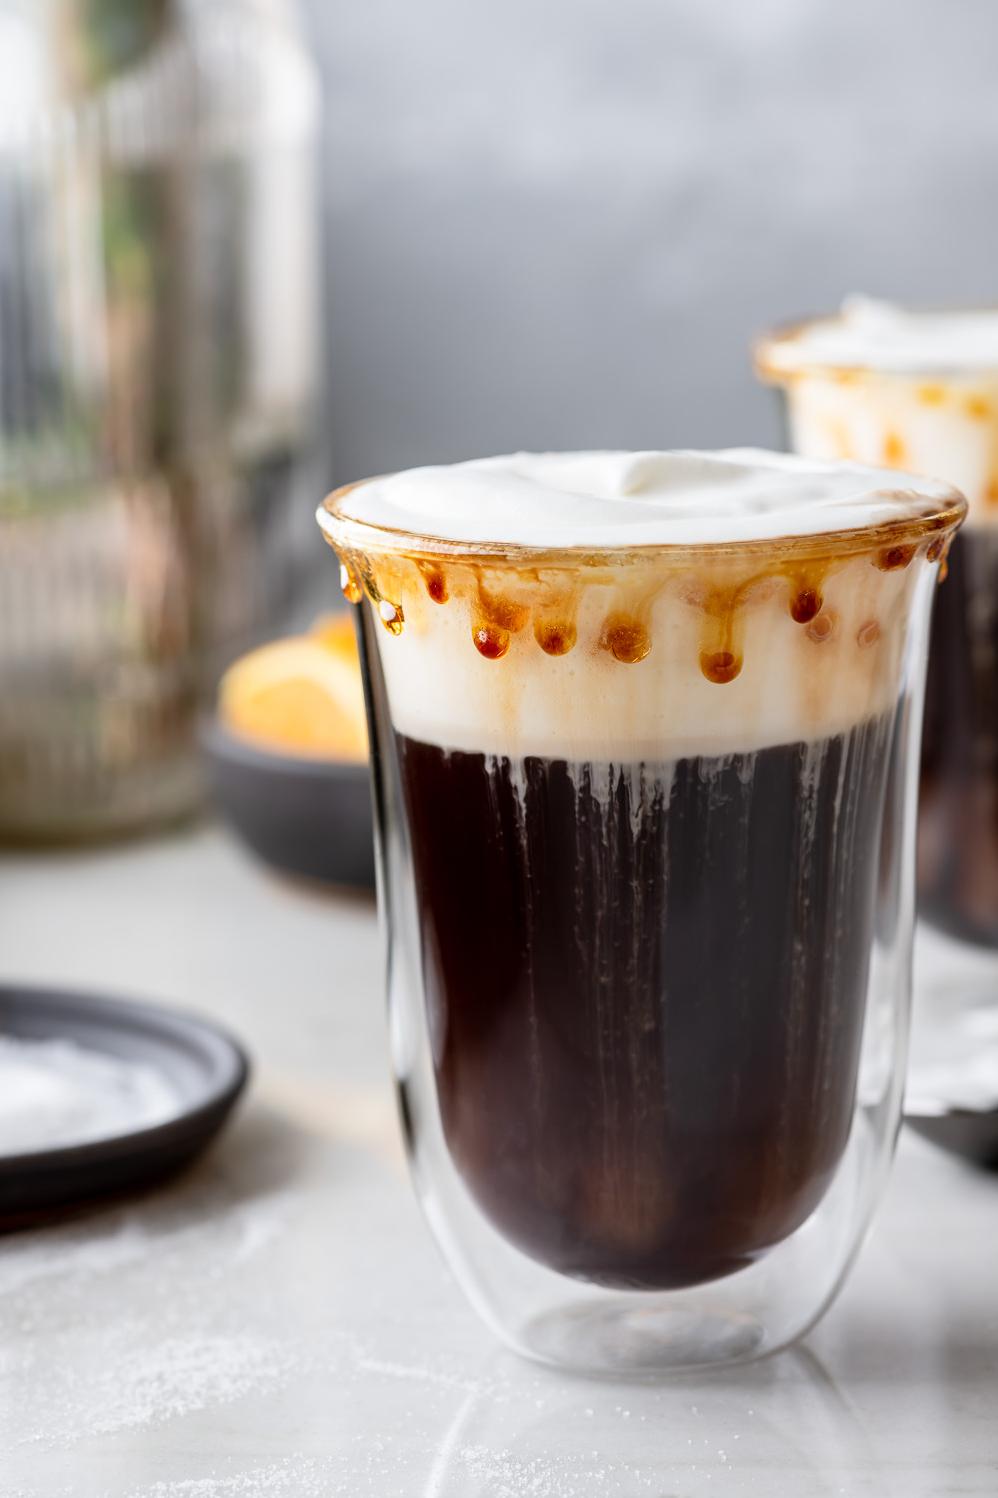  Warm up with a mug of this cozy and comforting beverage